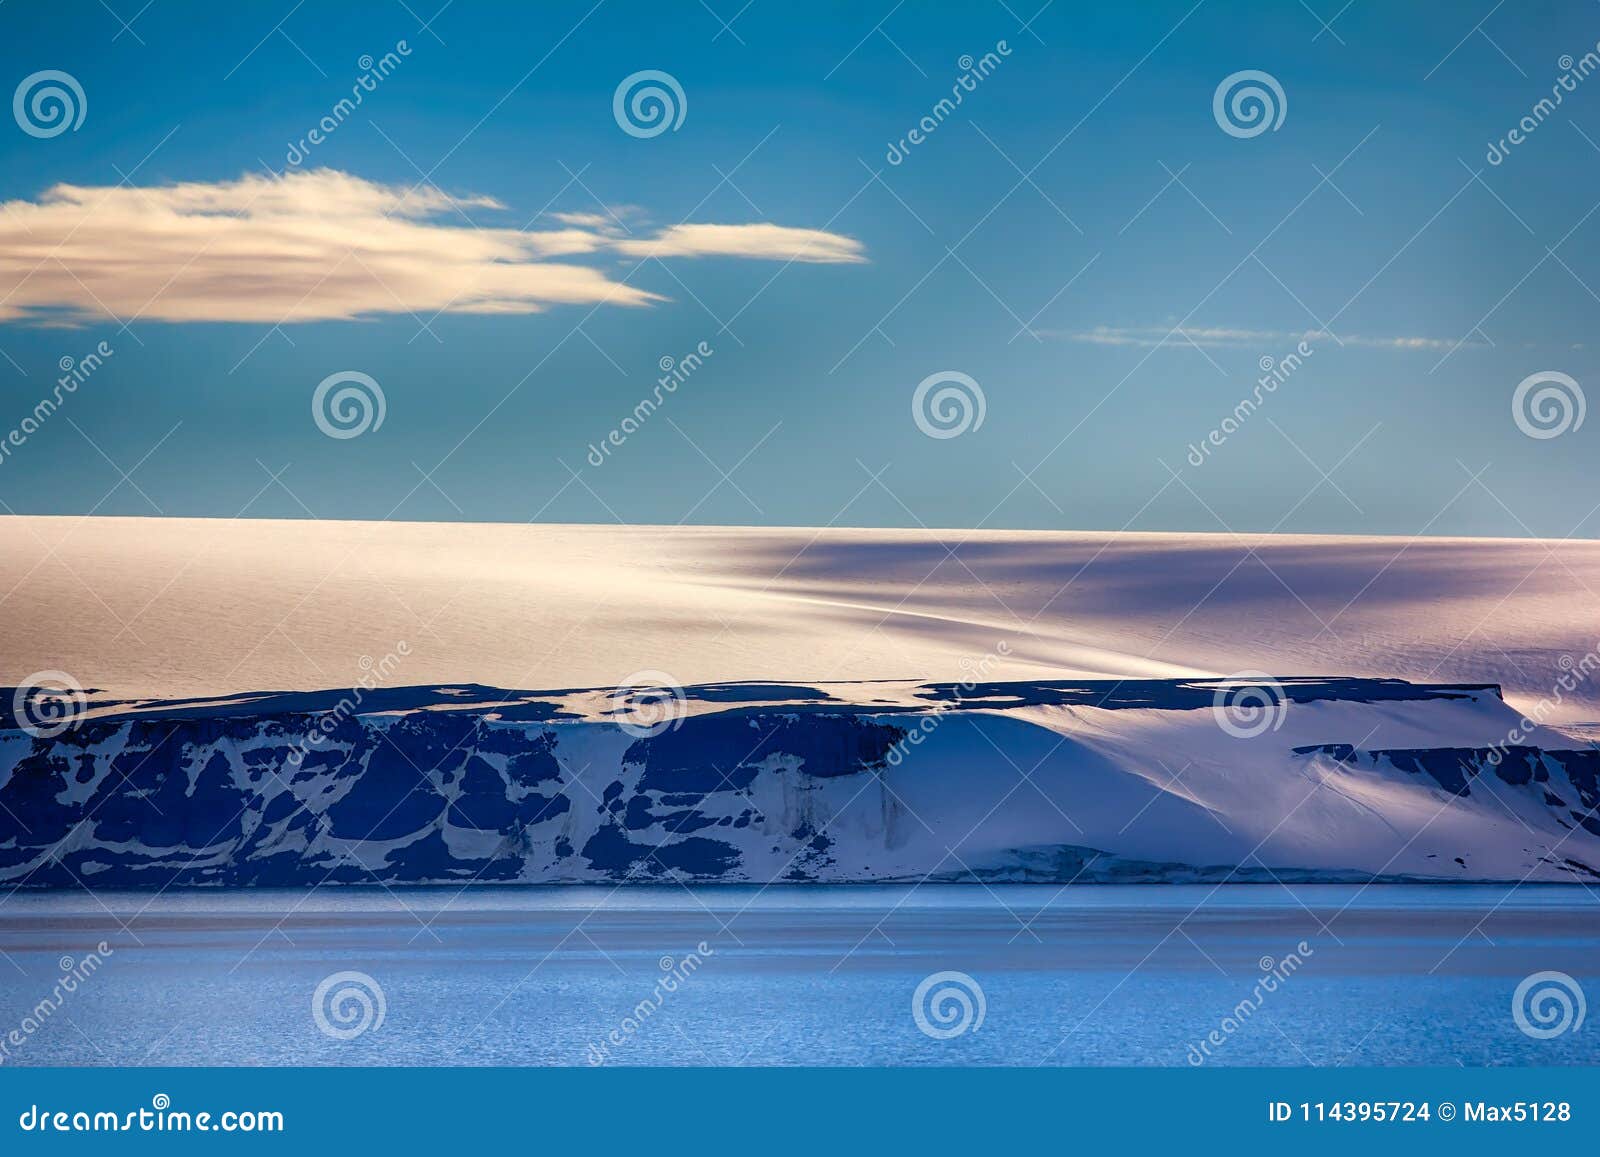 arctic islands glaciers, snowfields and rock outcrops